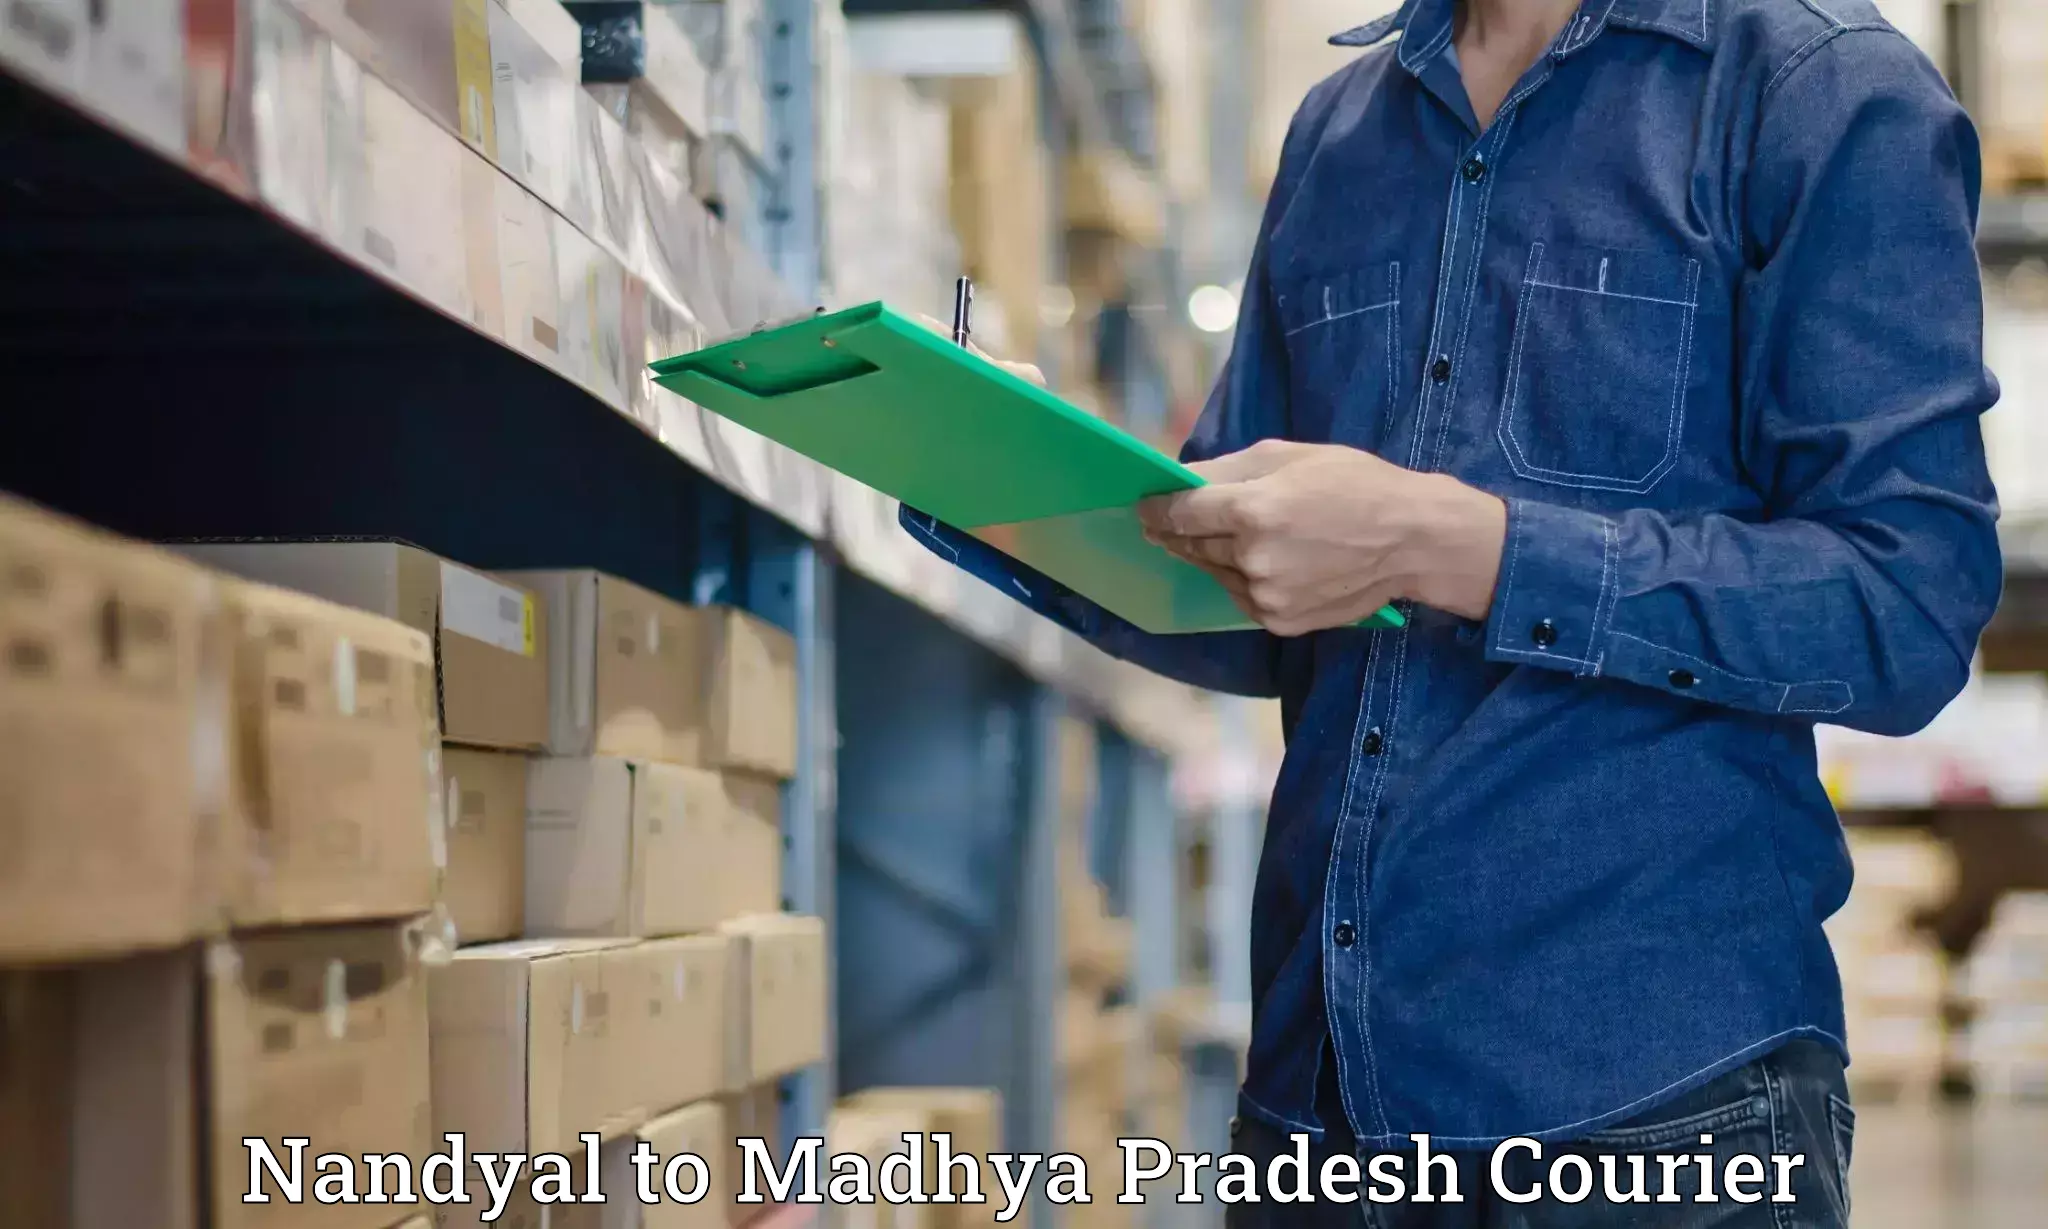 24-hour courier service Nandyal to Harda